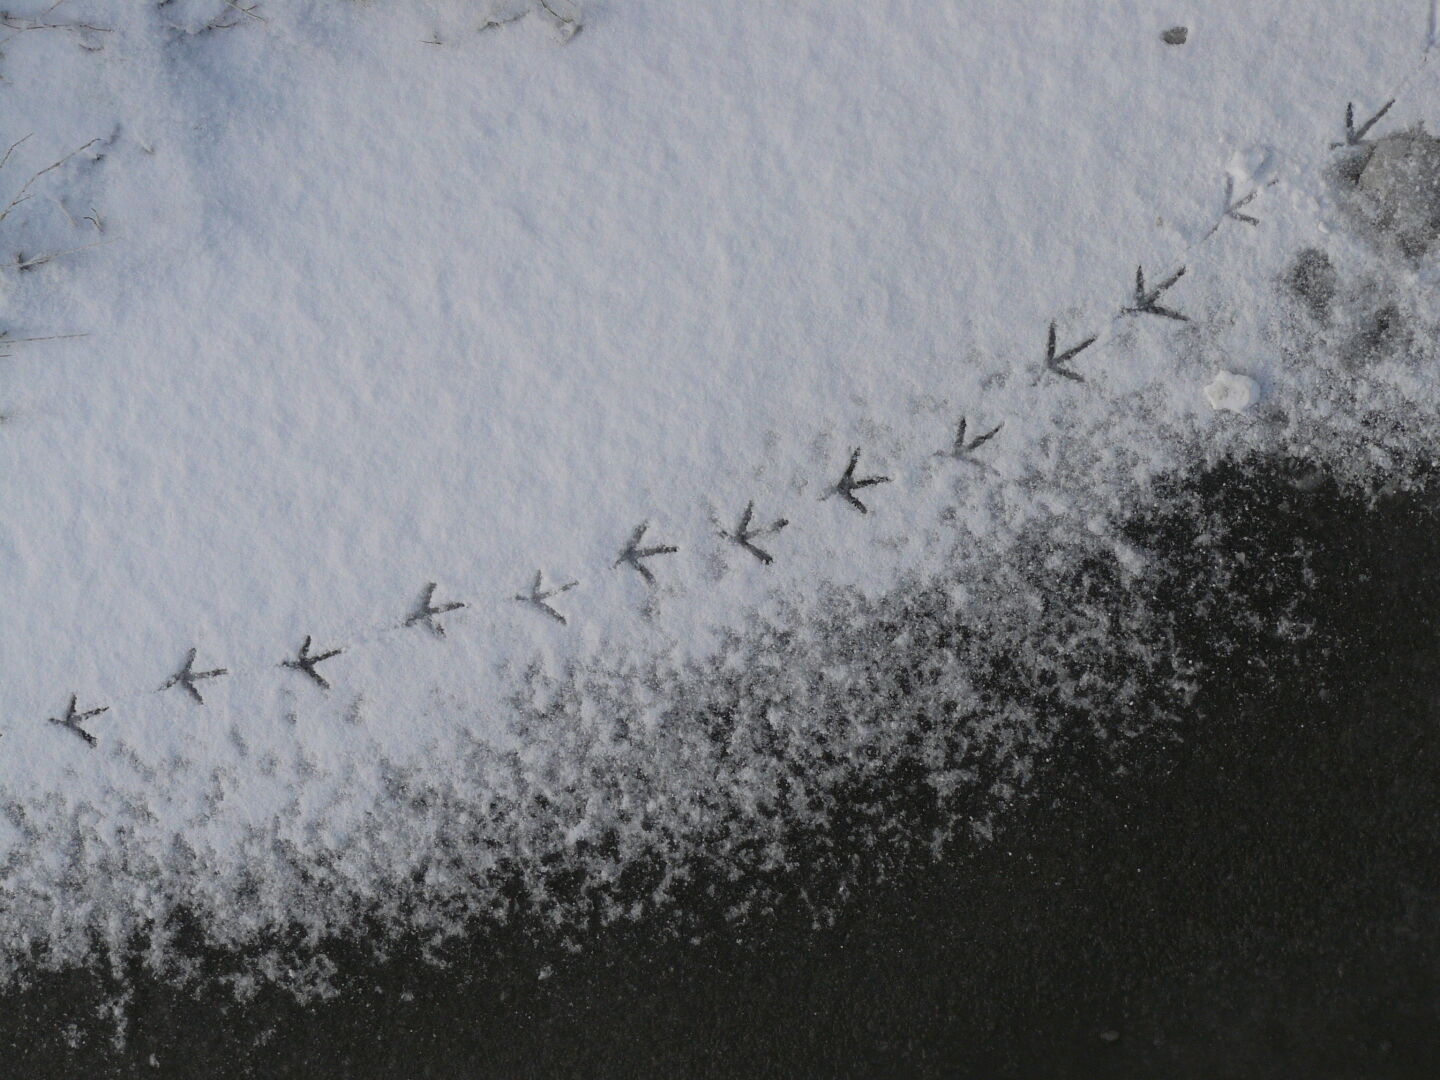 More bird&rsquo;s tracks, on ice on a small beck.